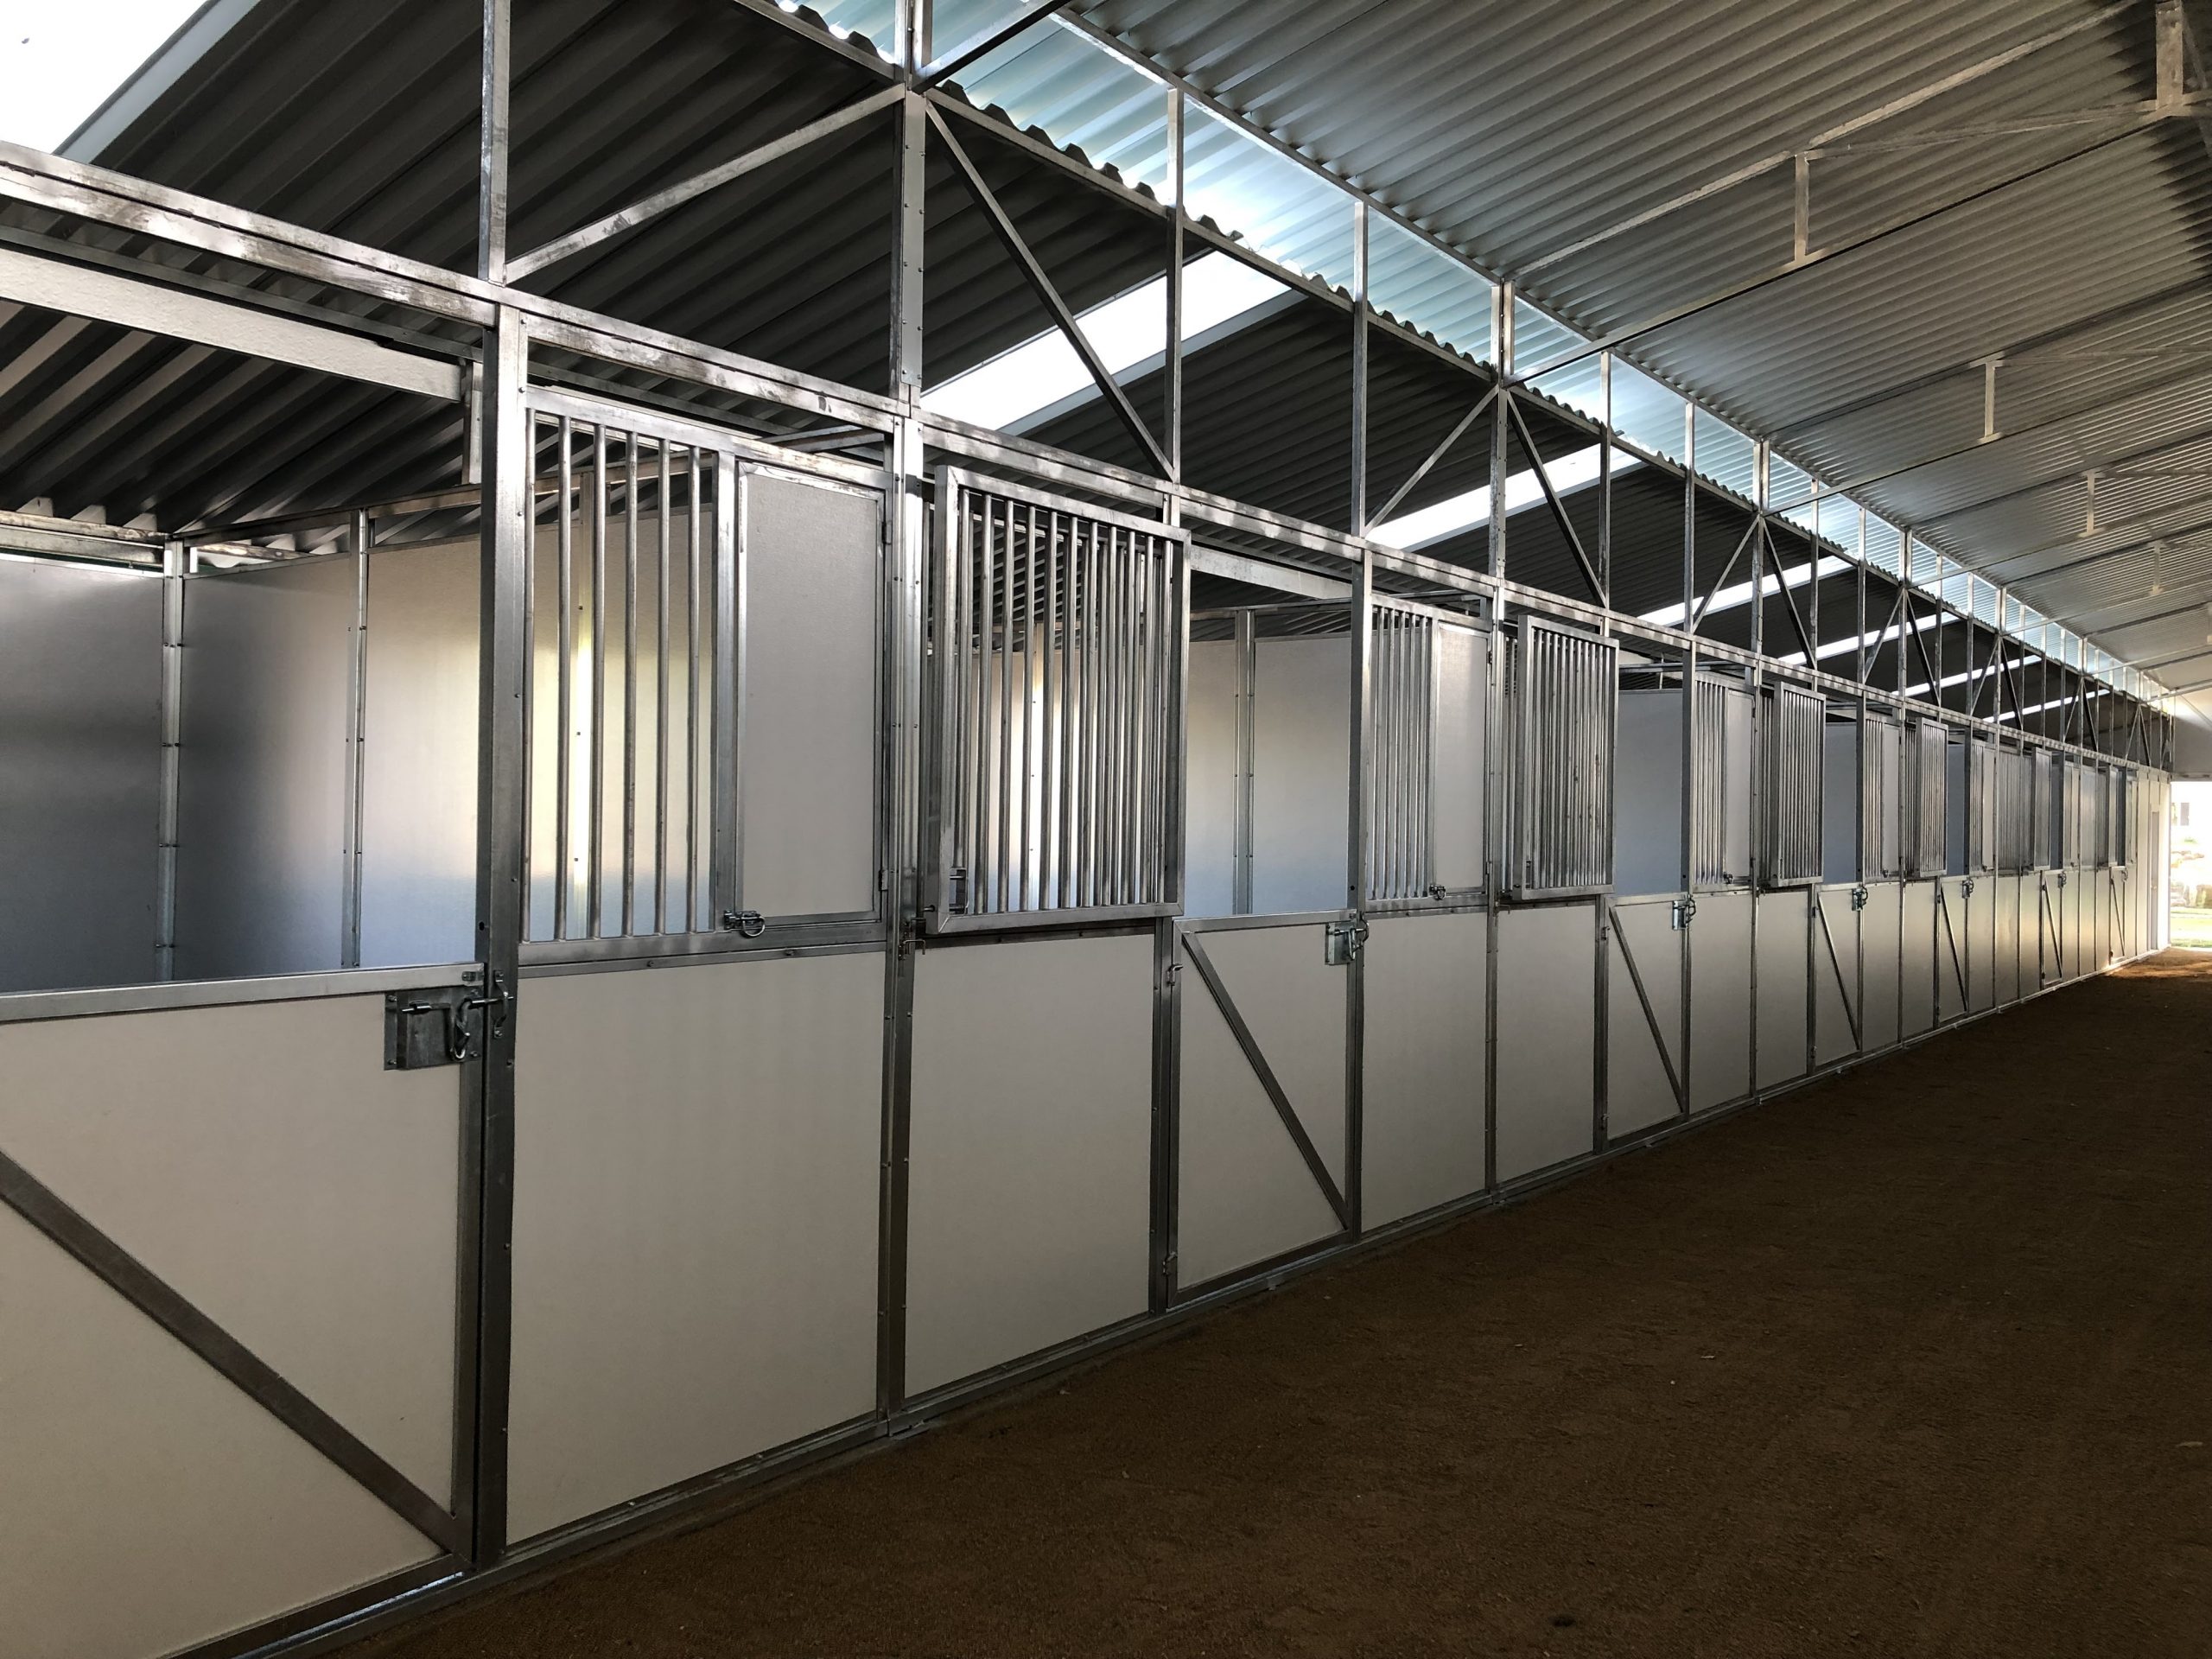 How Are Metal Horse Barns a Weatherproof Solution for Equestrian Spaces?